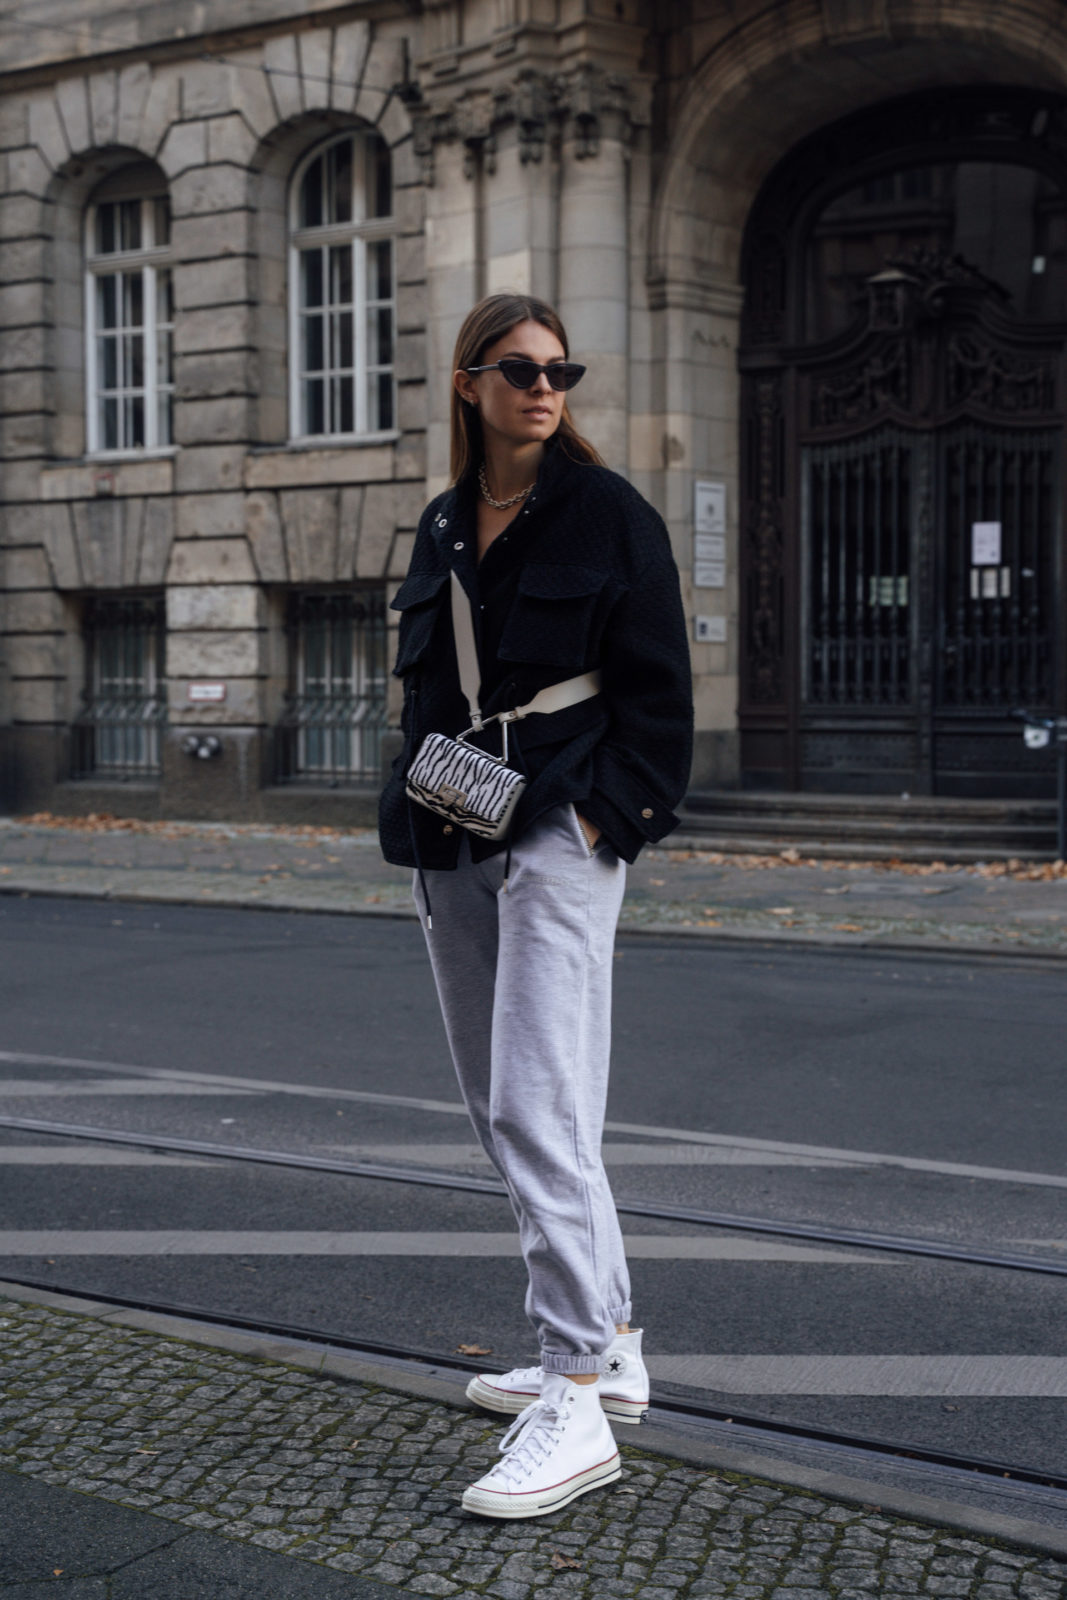 What To Wear With Black Sweatpants: 15 Amazing Outfit Ideas